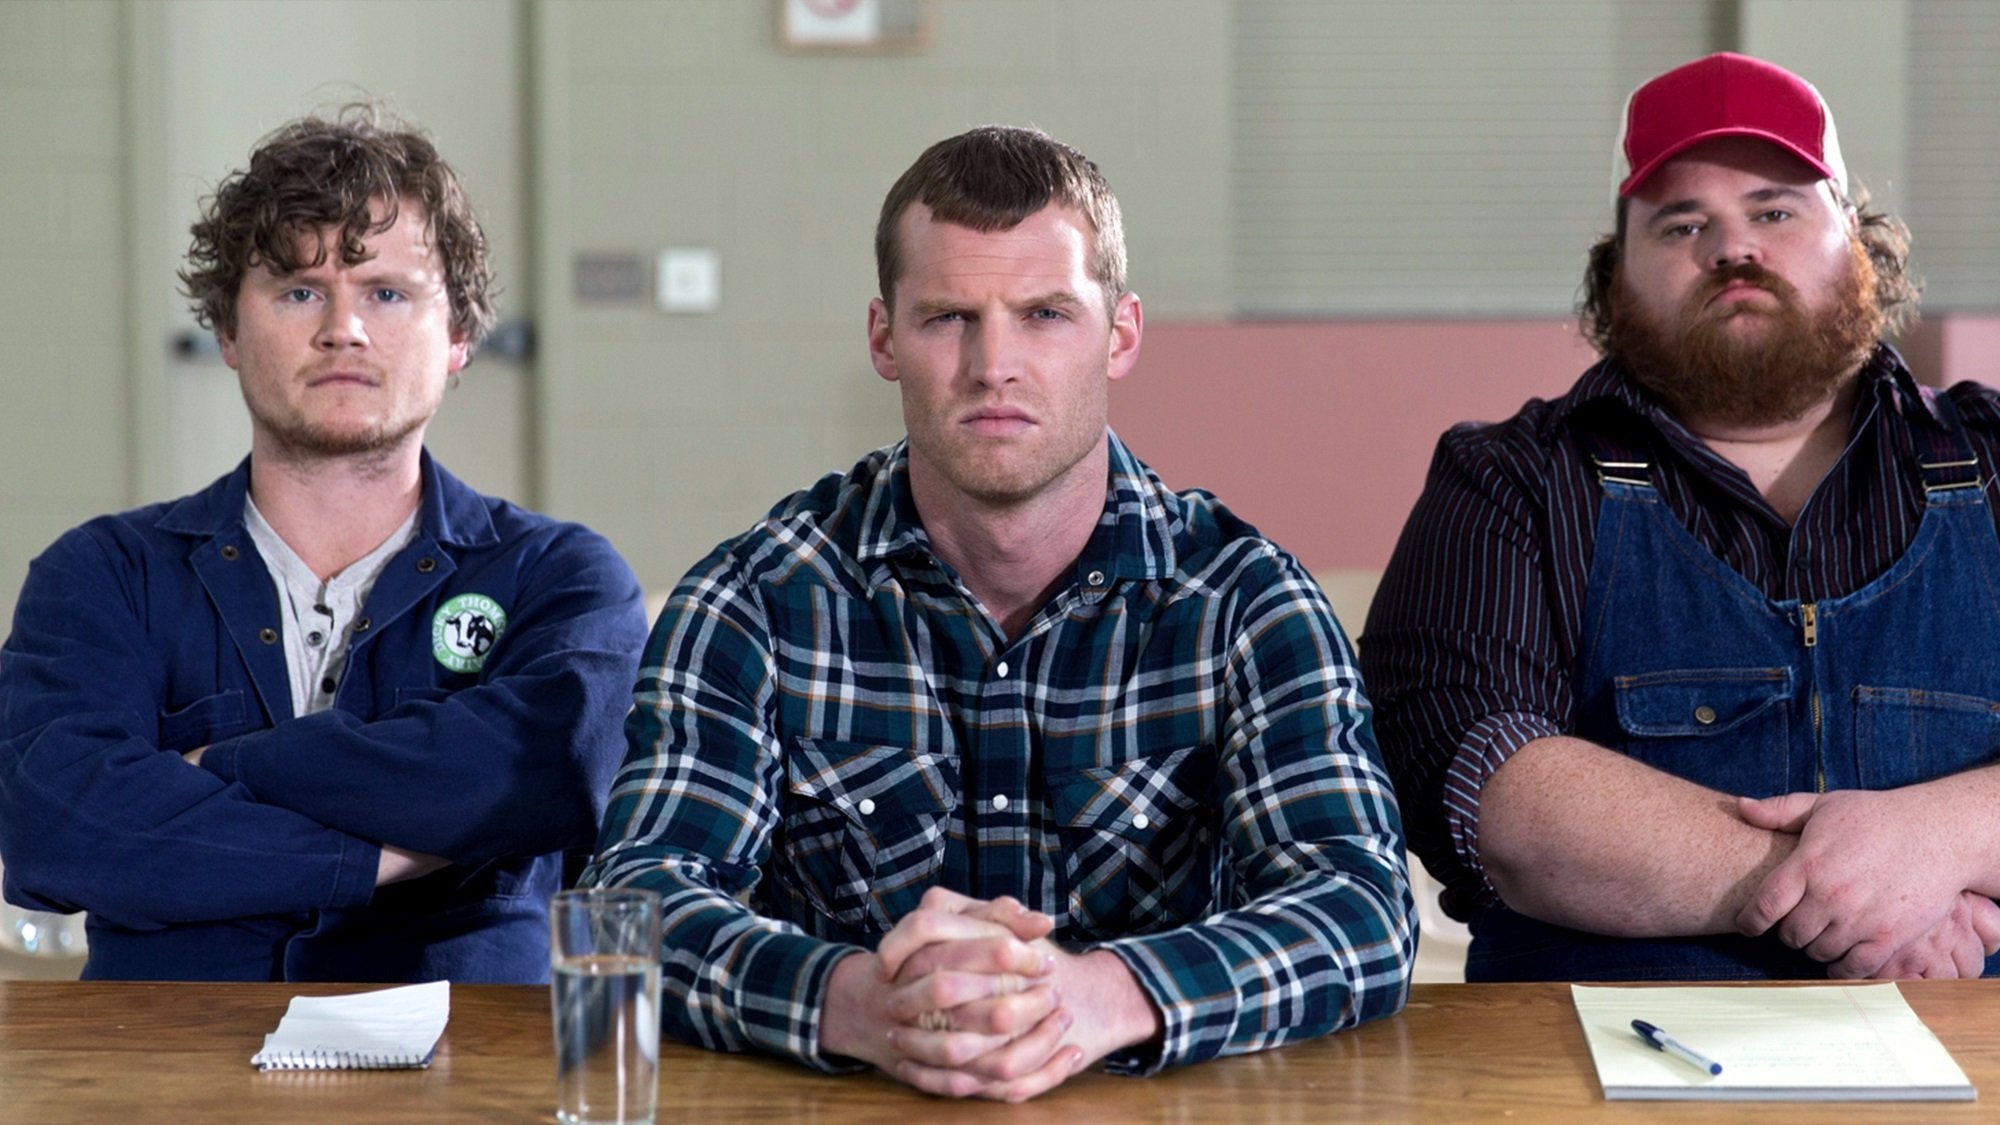 Letterkenny TV series, Online streaming guide, Watch from anywhere, Android Central, 2000x1130 HD Desktop